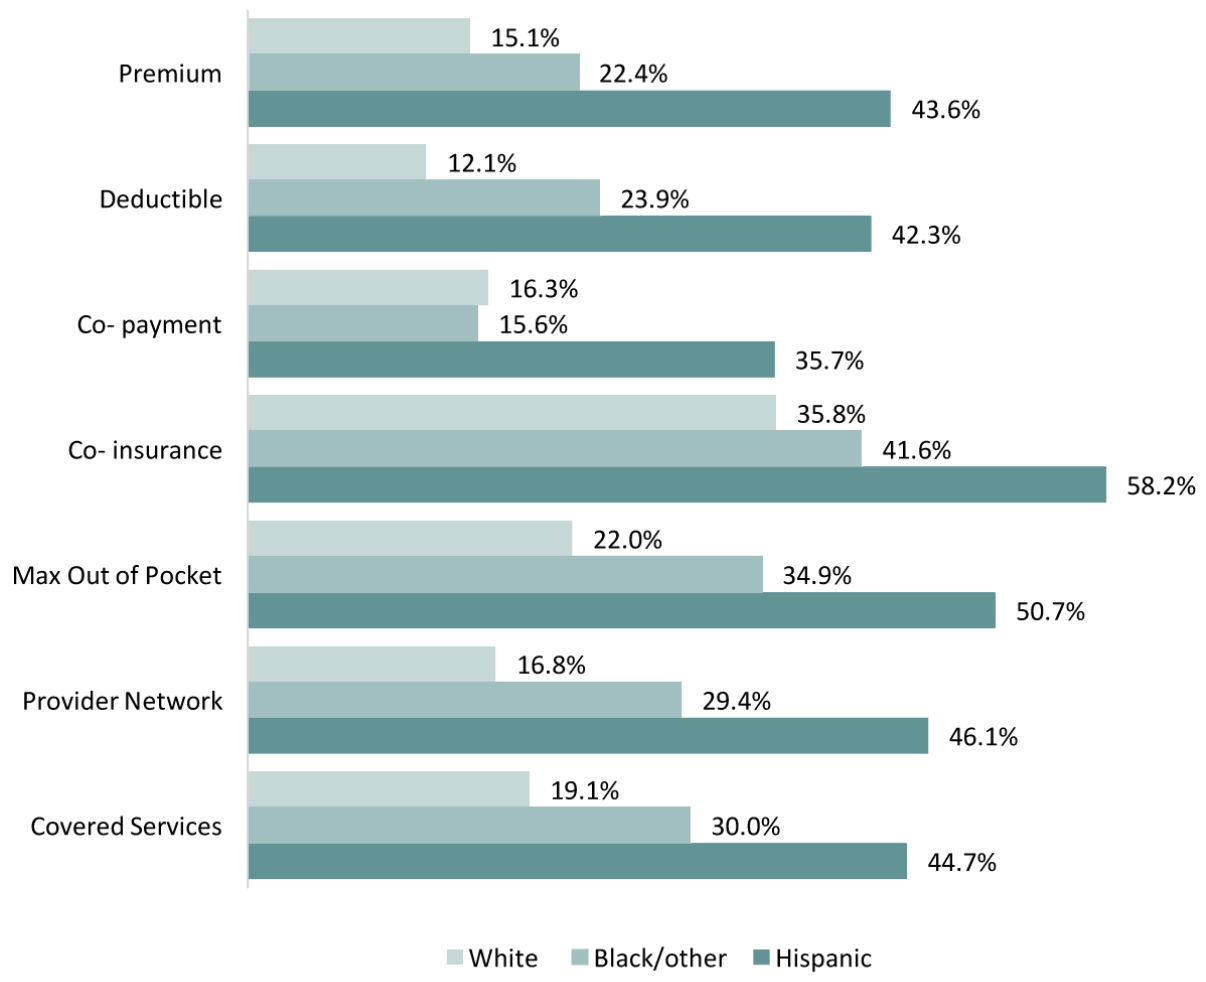 This graph compares the lack of confidence in understanding health insurance terminology among Texans ages 18–64 by race/ethnicity.